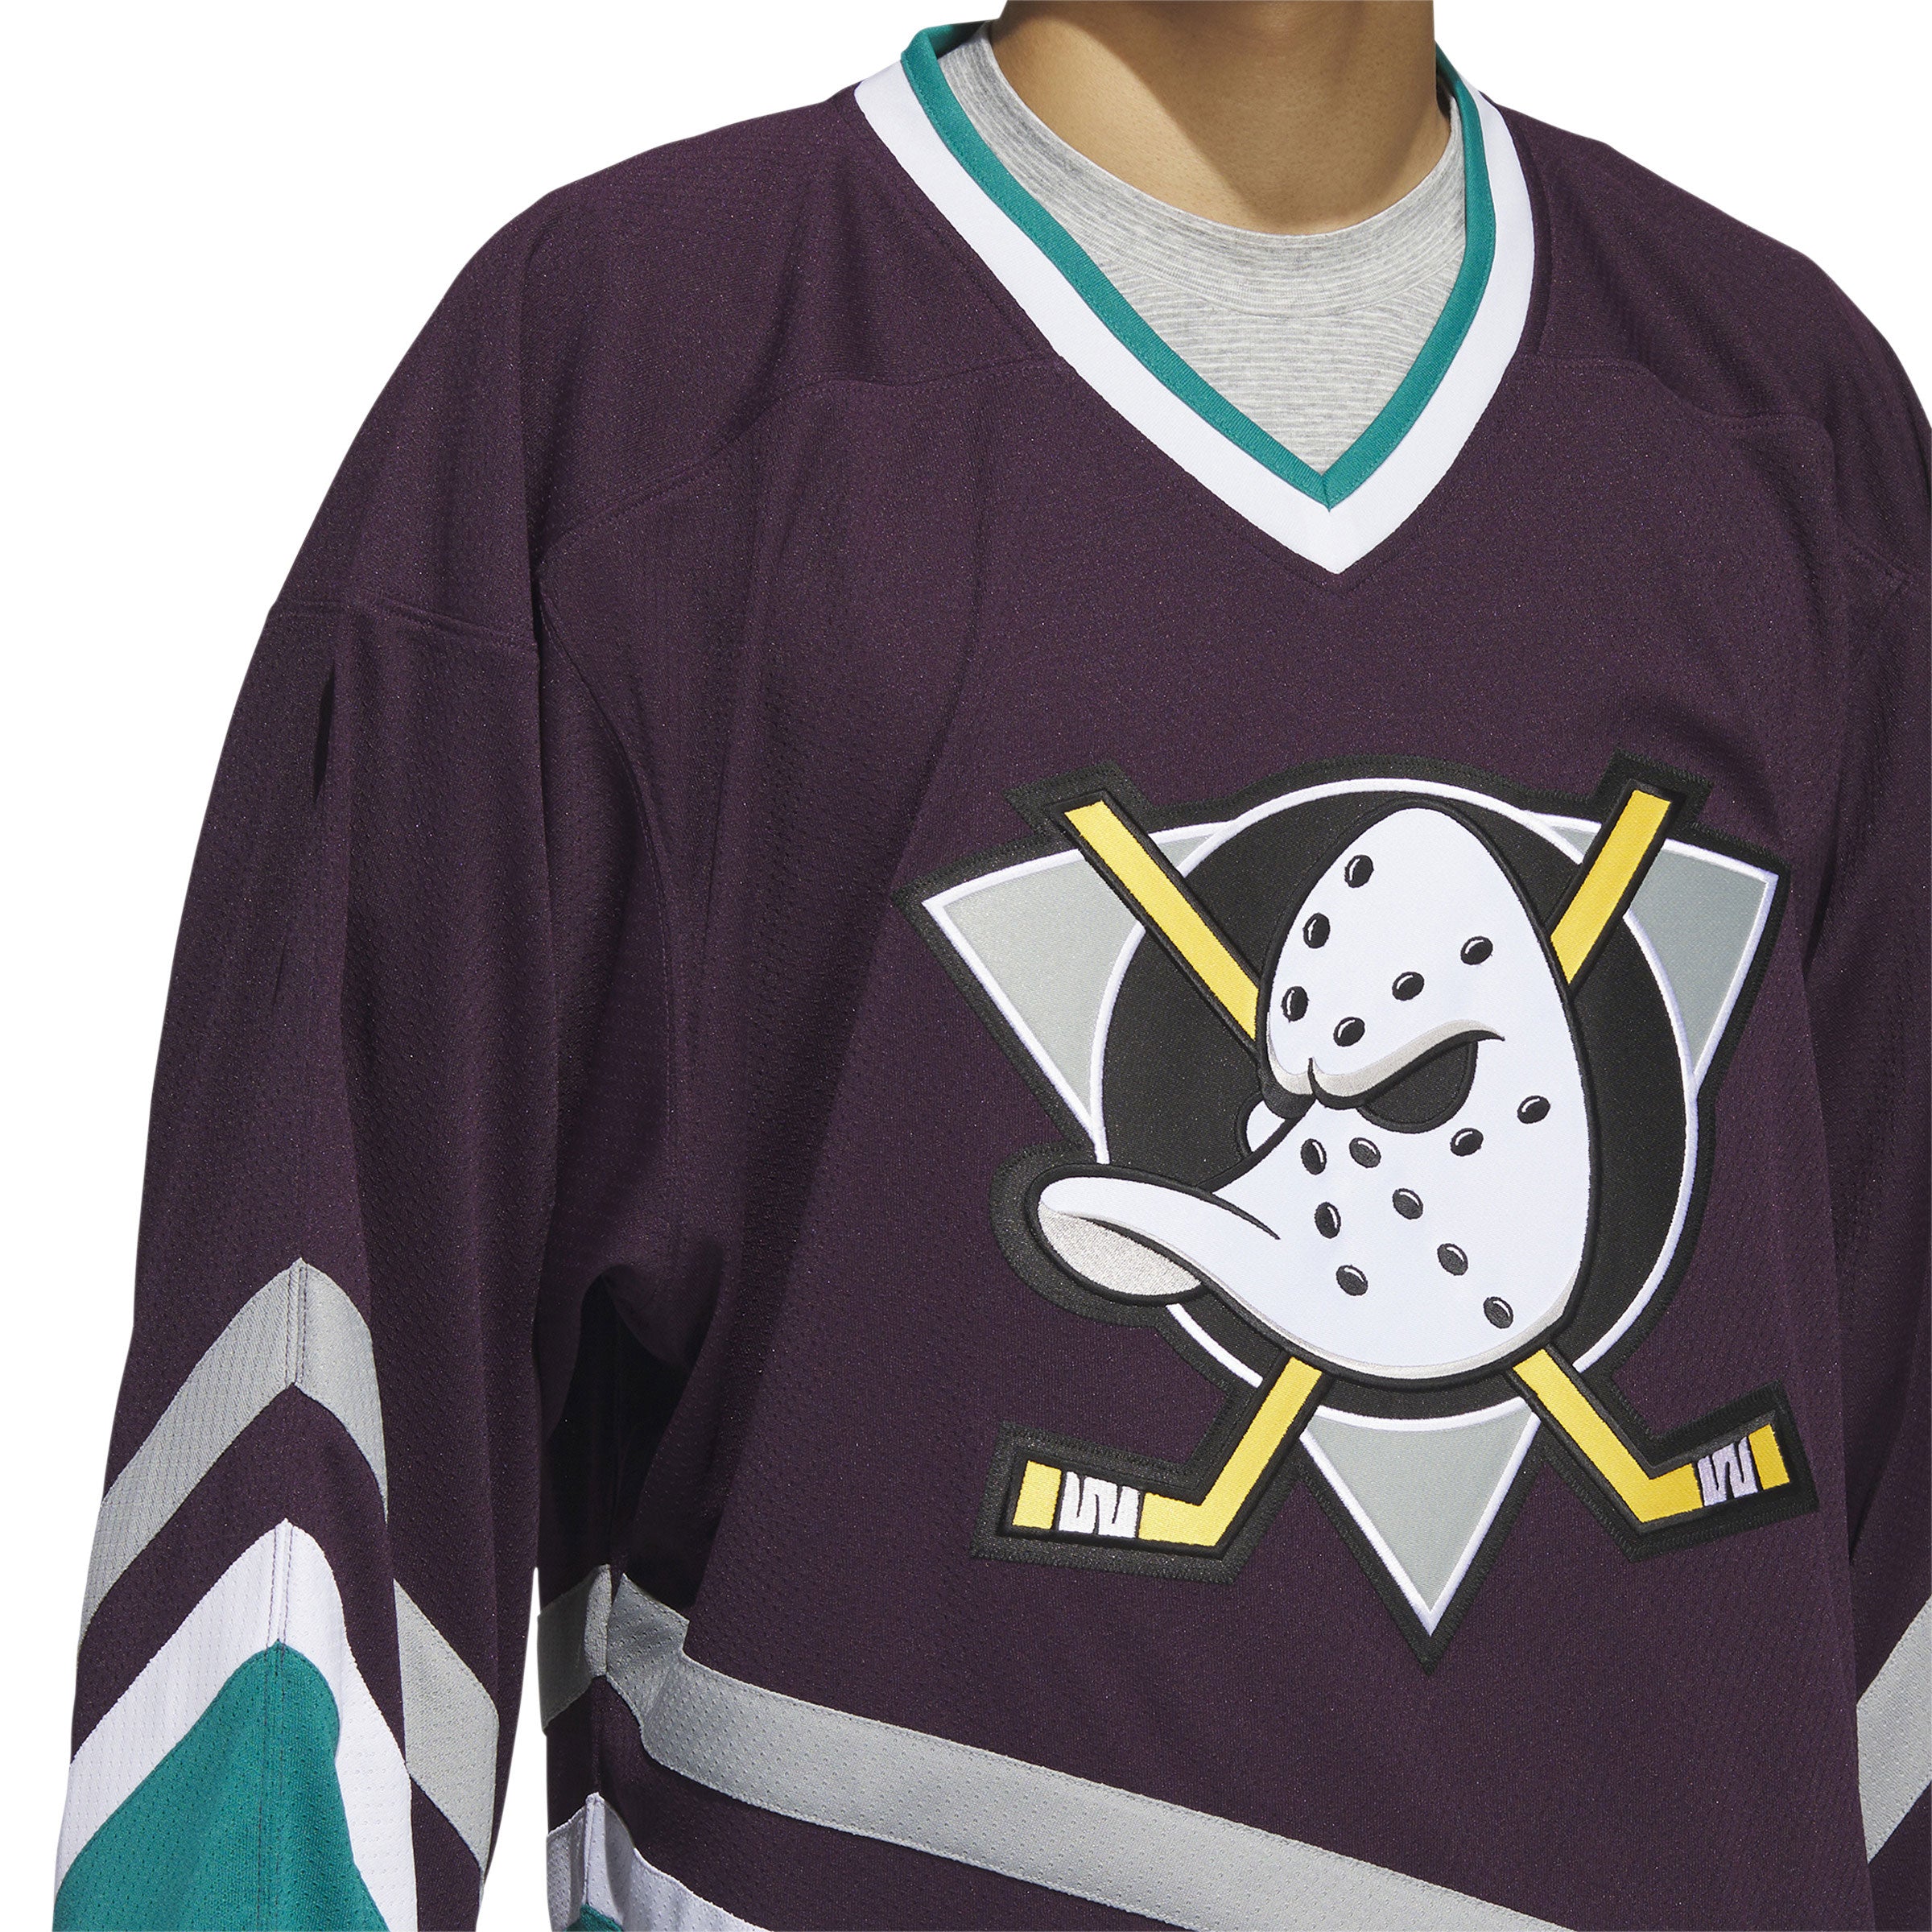 Anaheim Ducks - adidas was feeling mighty. The new Team Classics jersey are  now available in the Team Store and online here